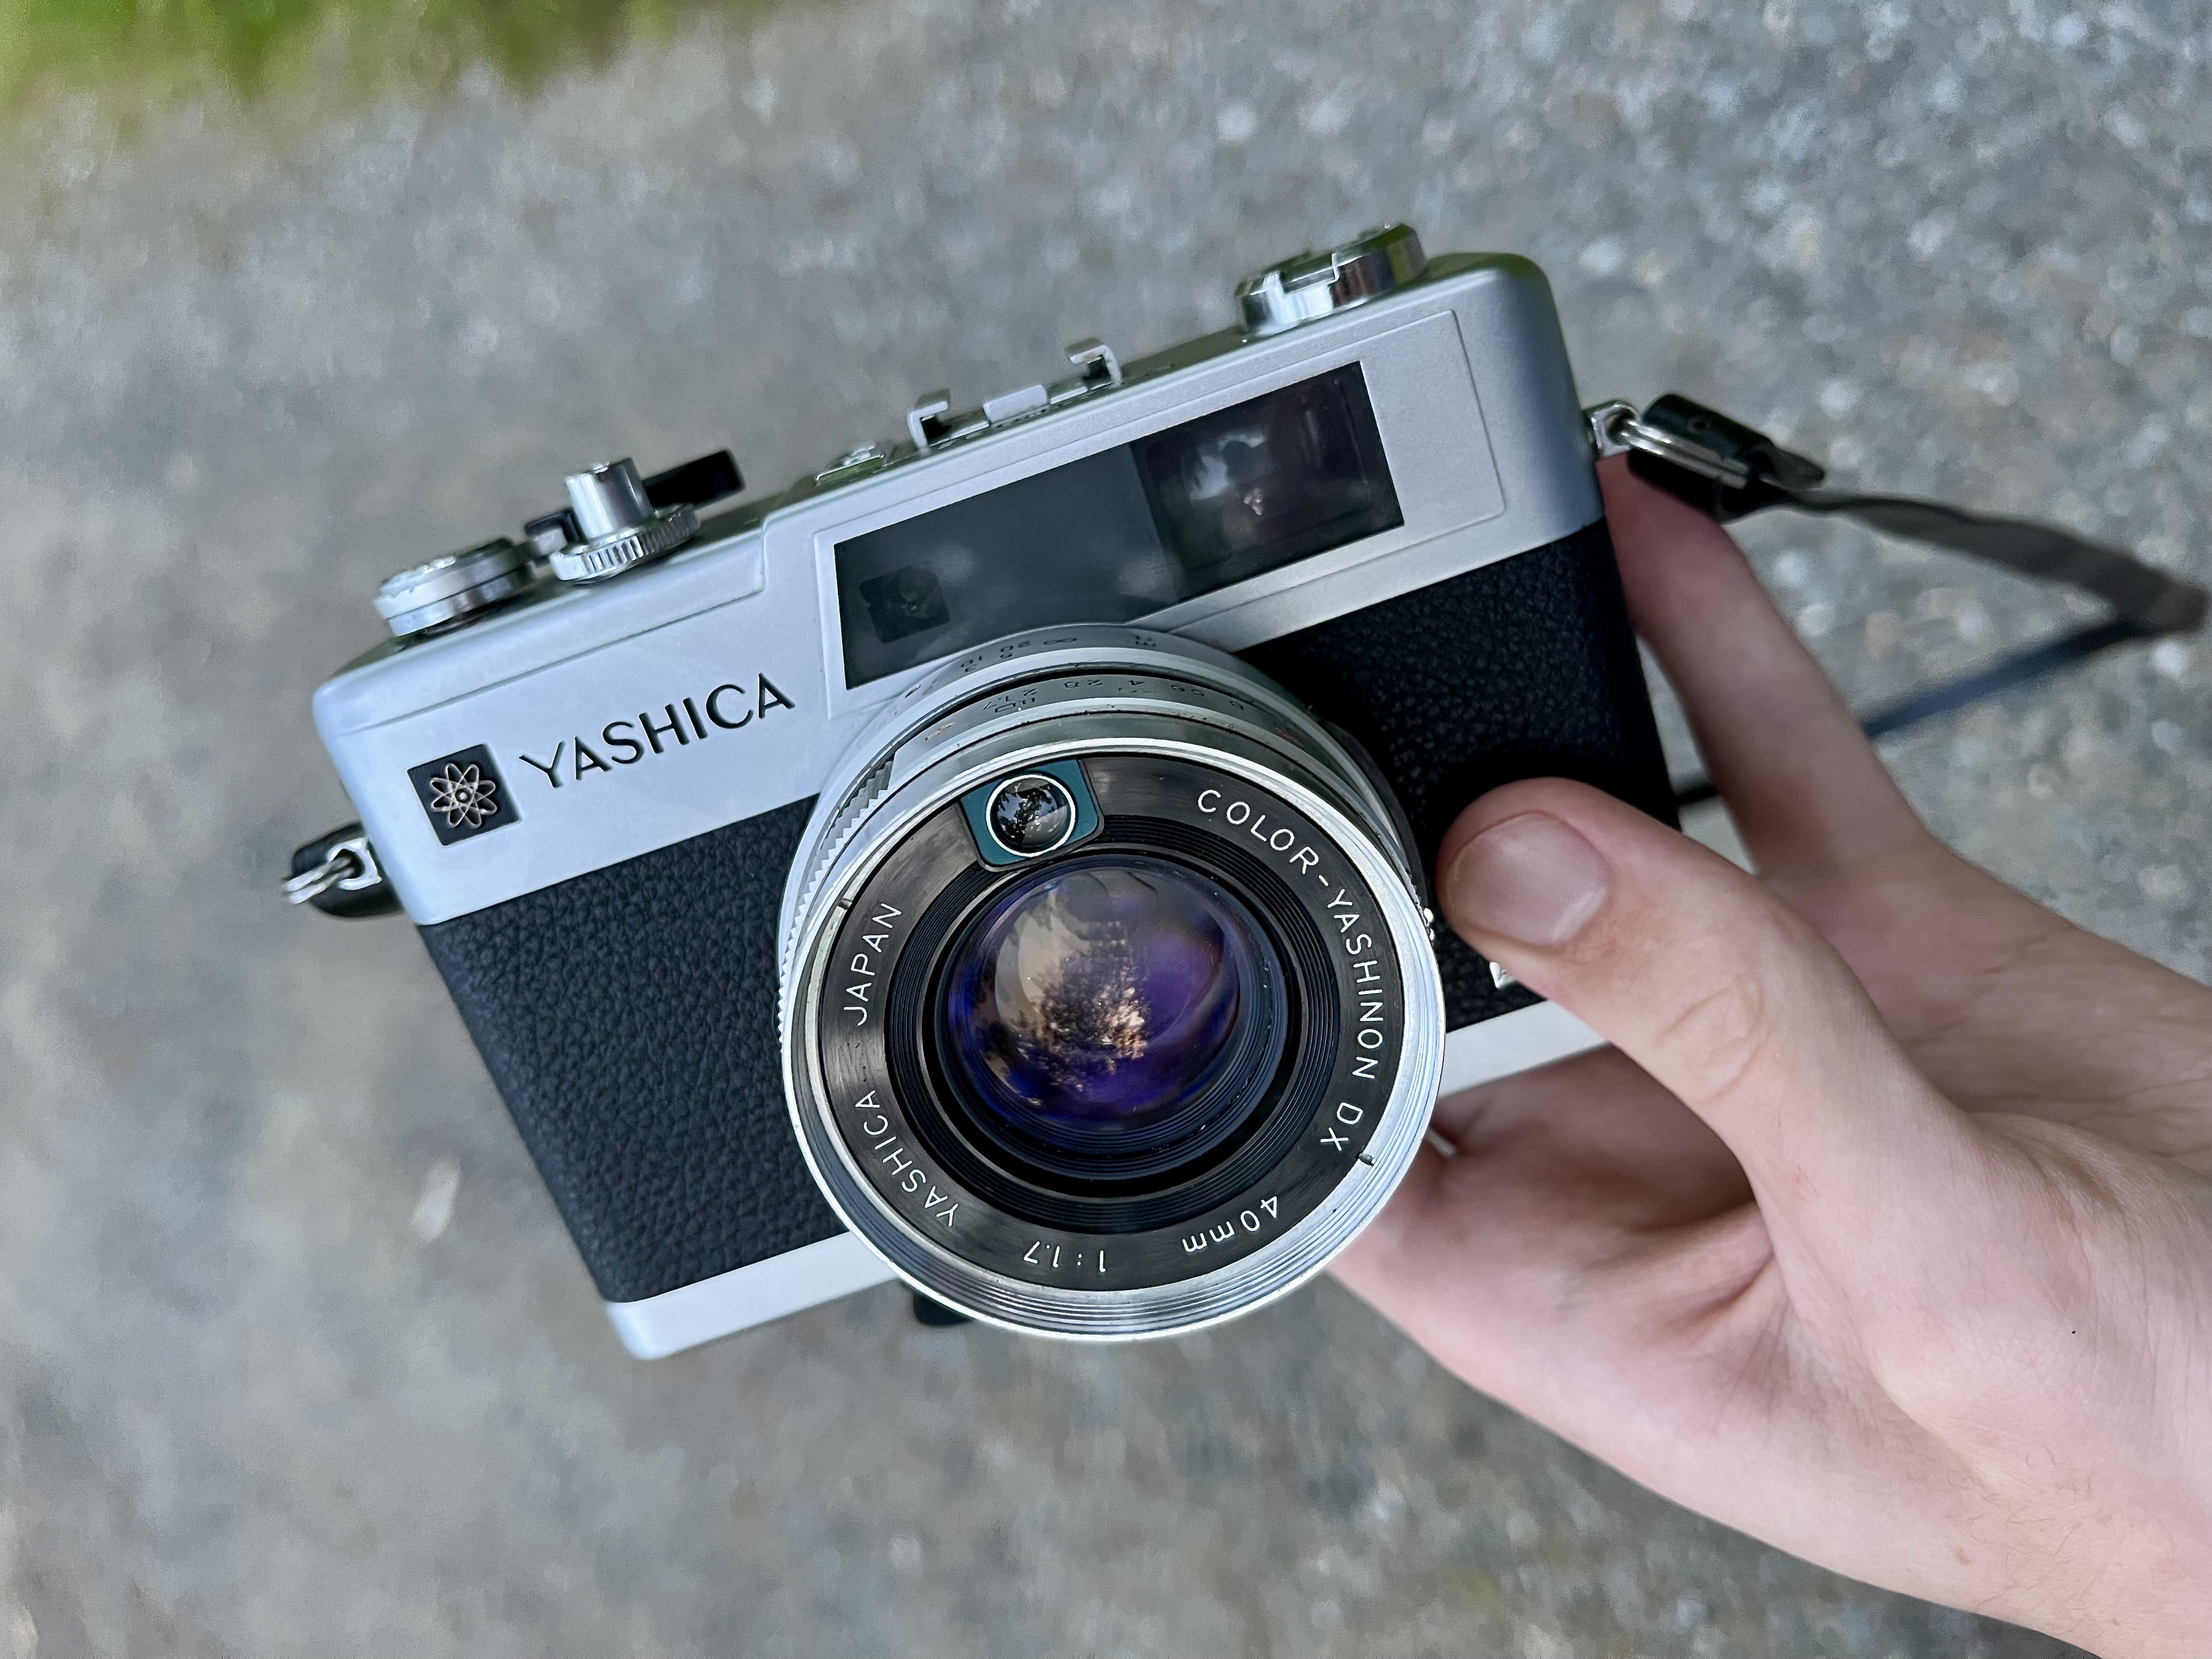 Yashica electro 35 gx held in one hand